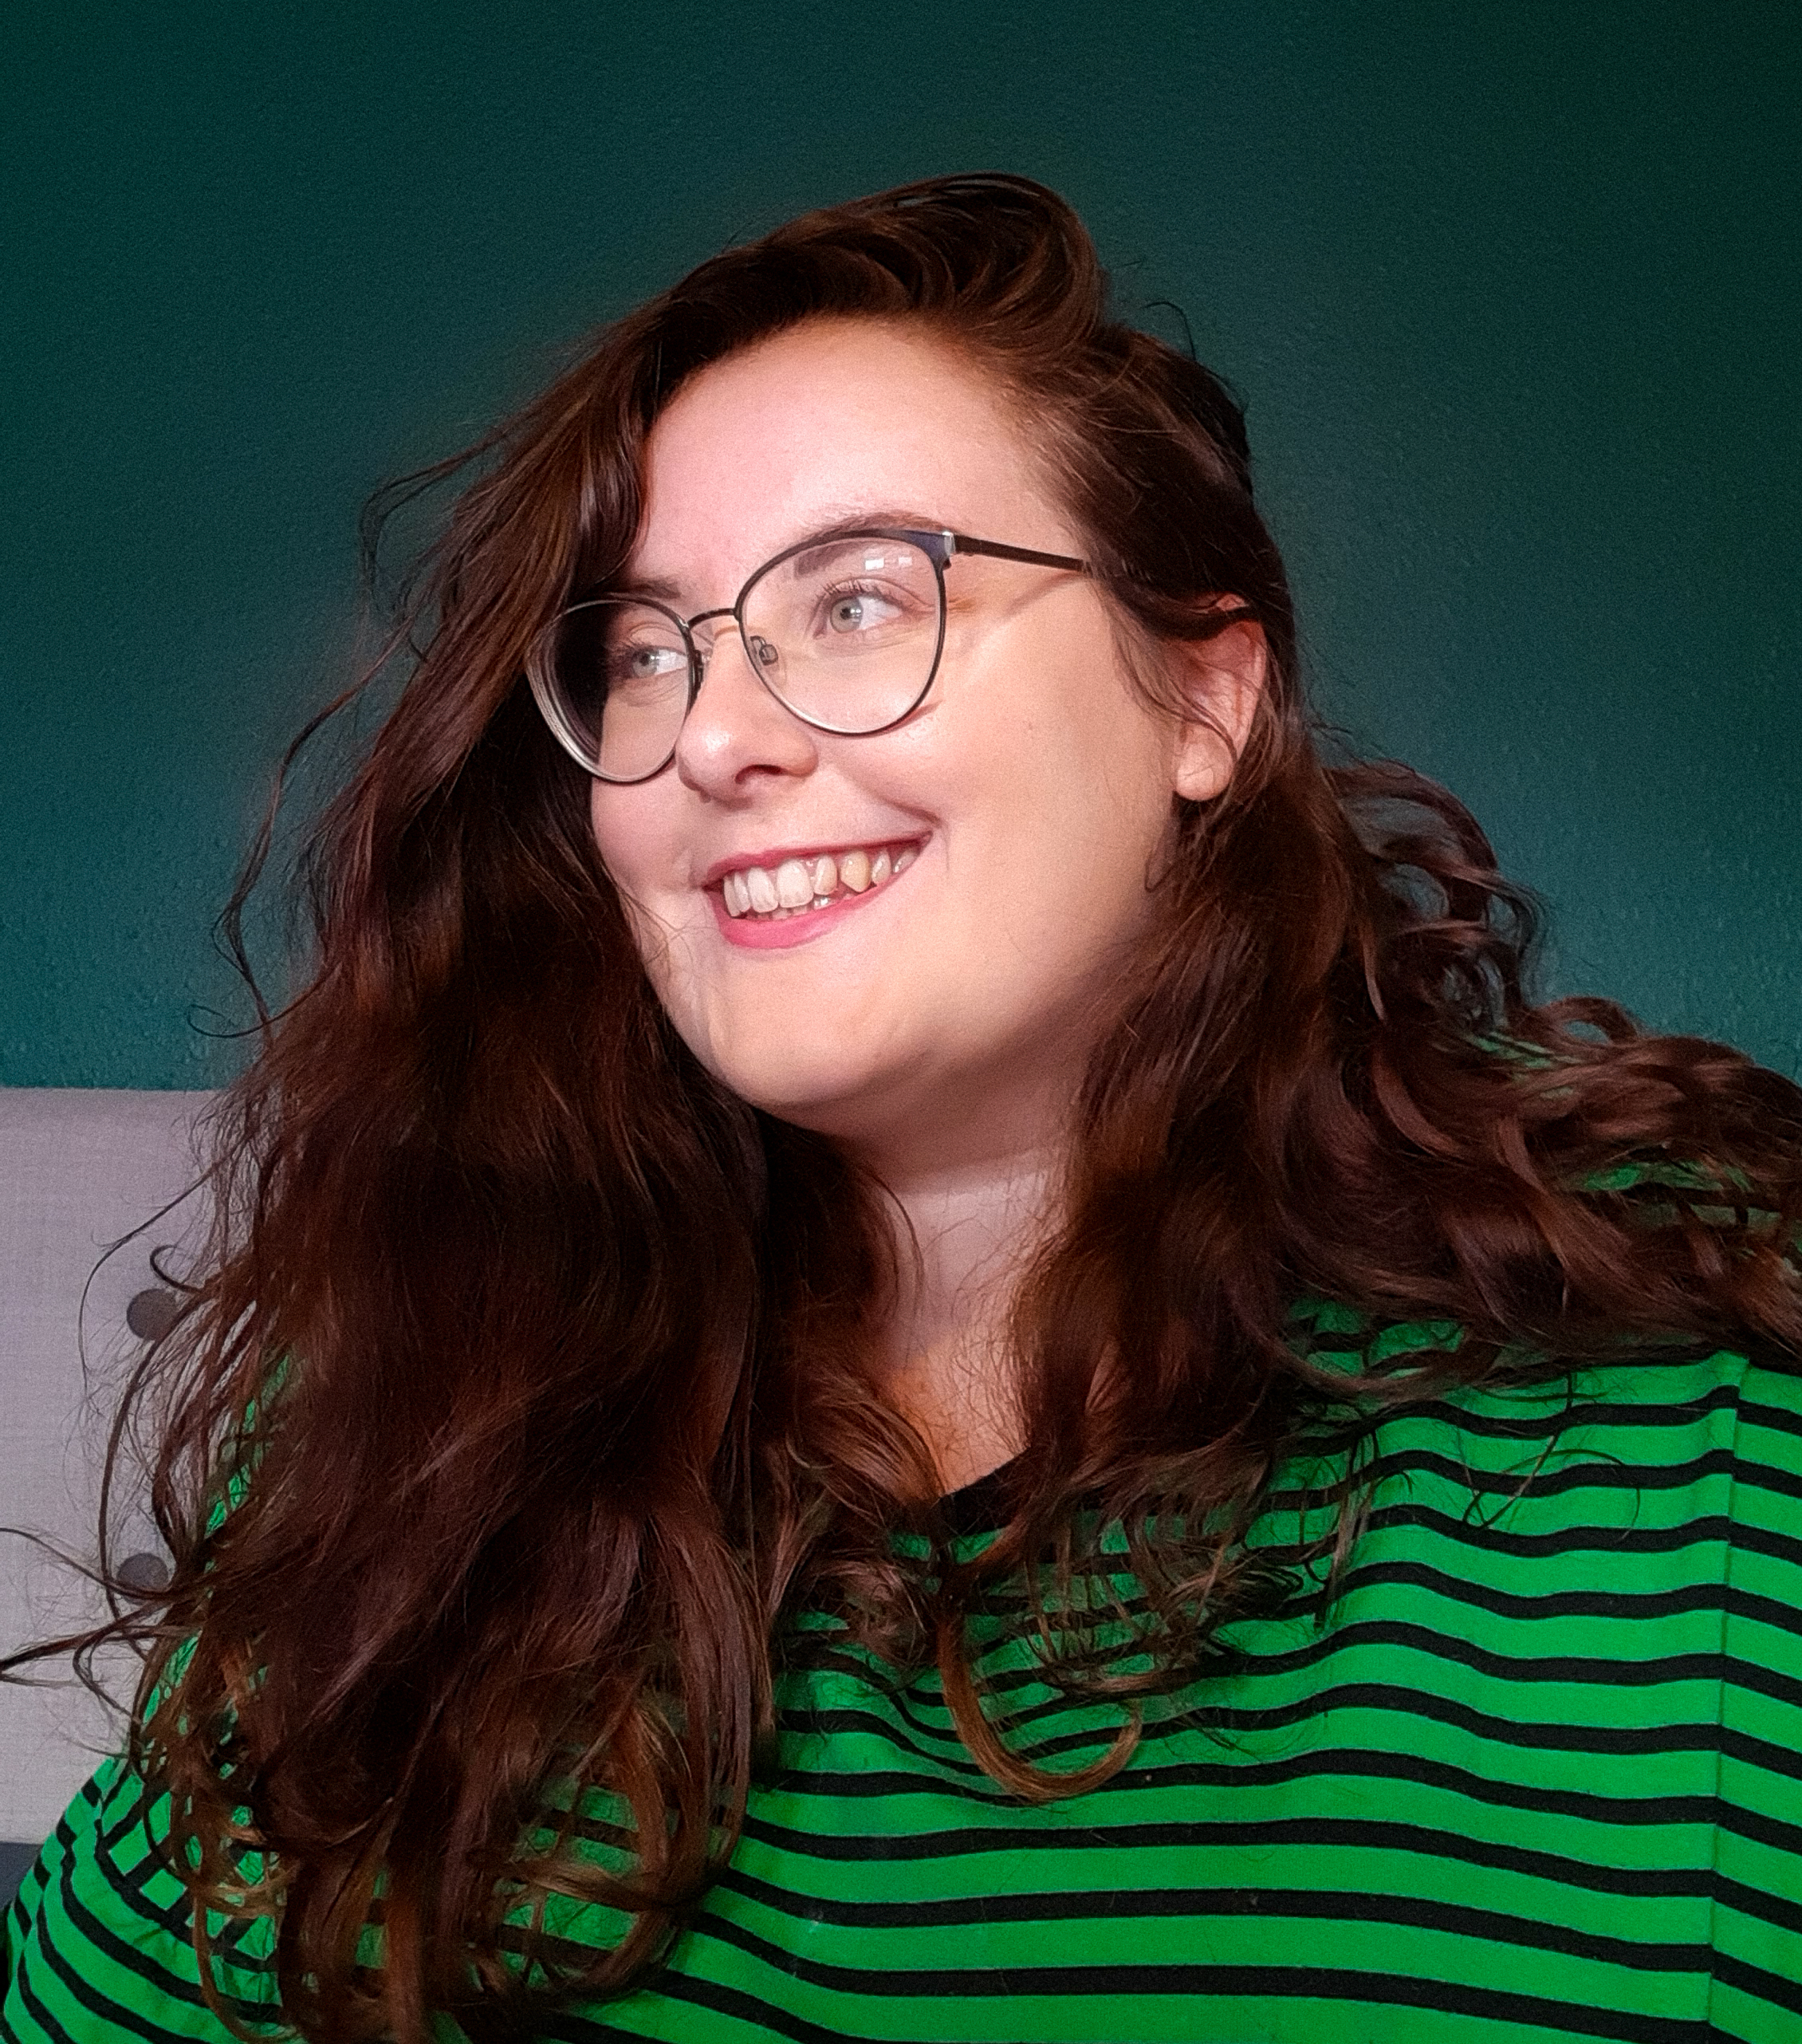 A picture of Rosie looking to the left. She has brown wavy hair and is Caucasian. She is wearing large, thin black glasses, and a green and black striped top.